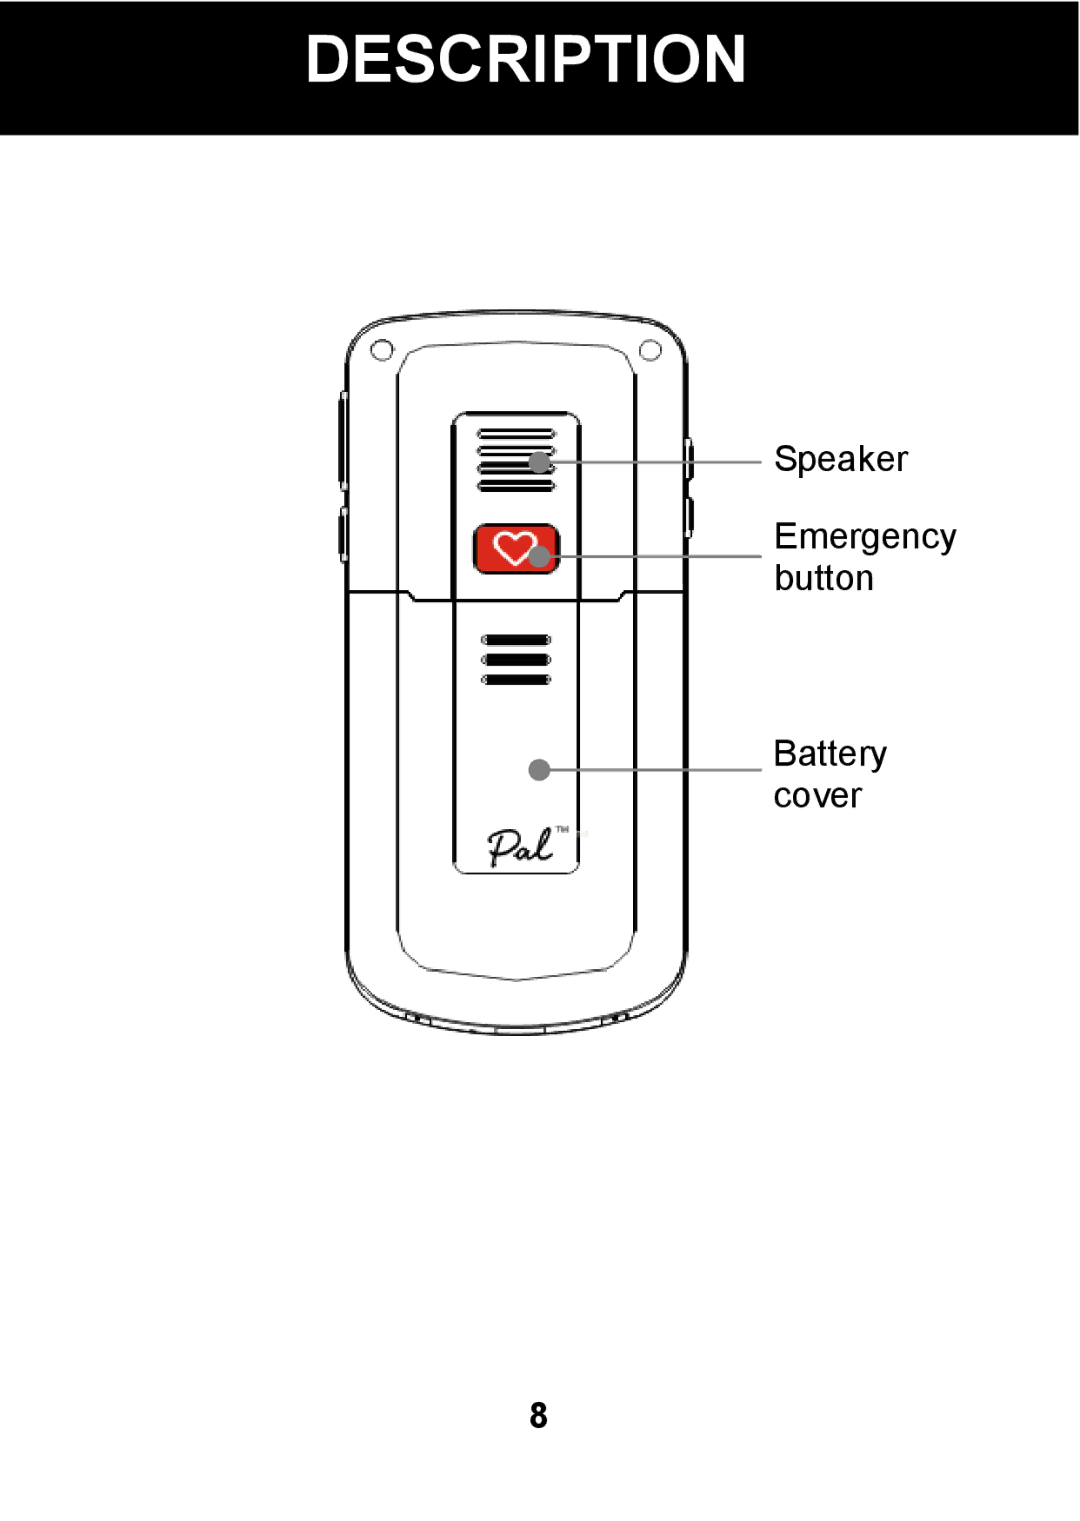 Pal/Pax PAL101 manual Speaker Emergency button Battery cover 